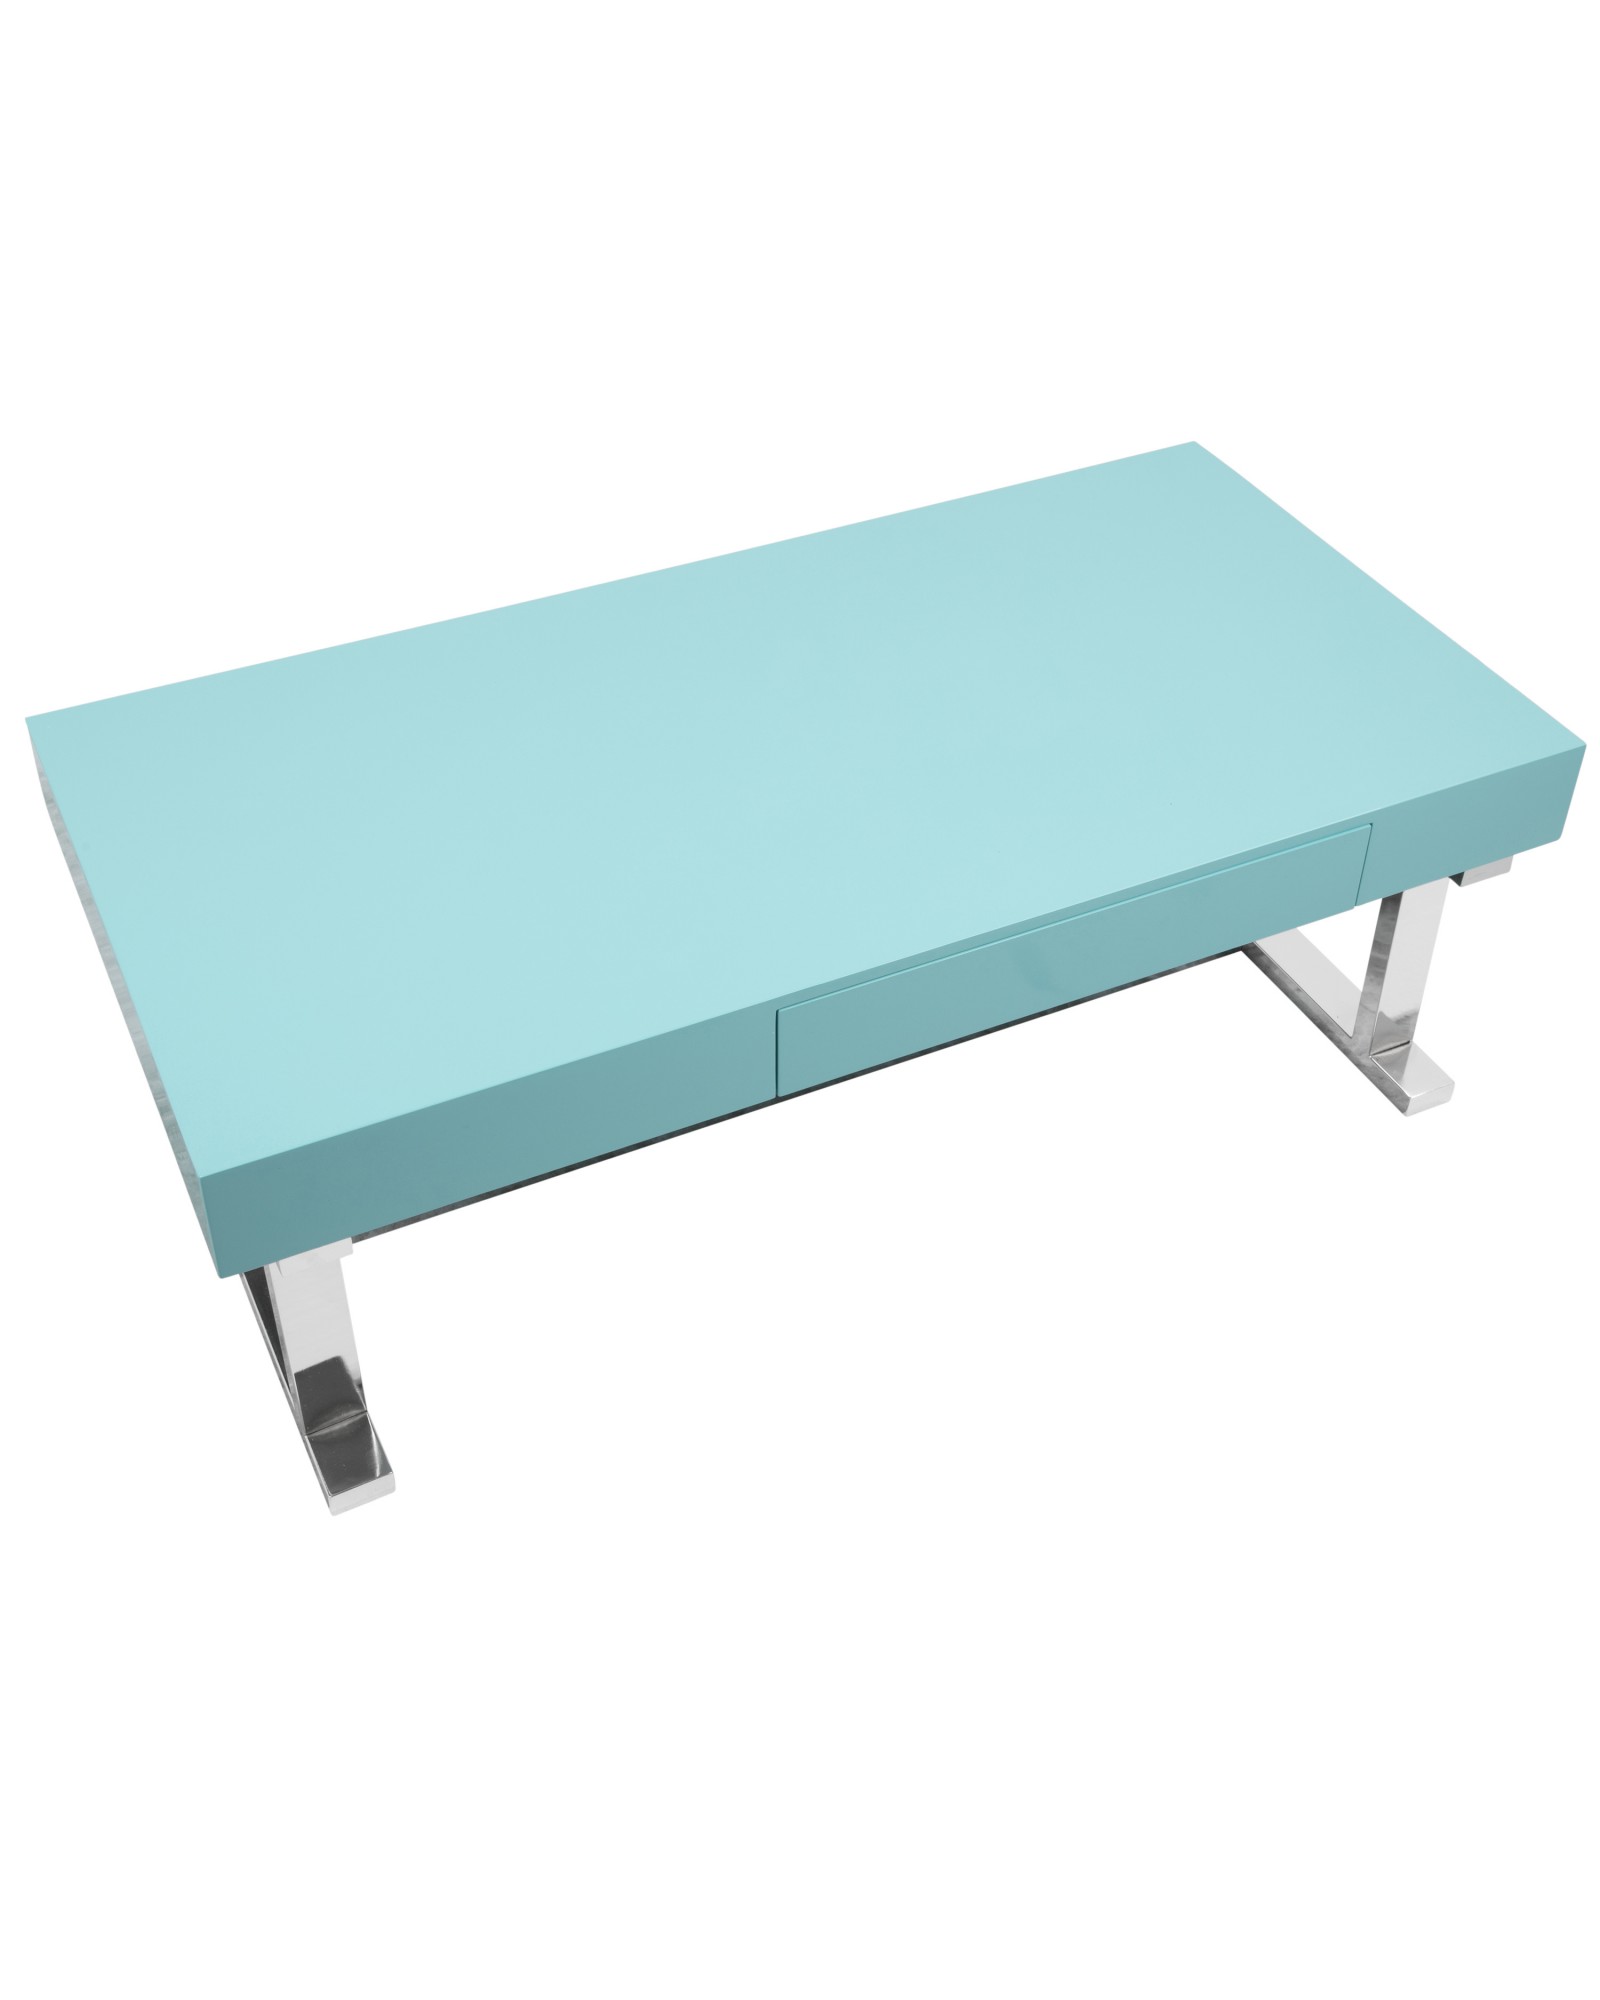 Luster Contemporary Coffee Table in Light Blue